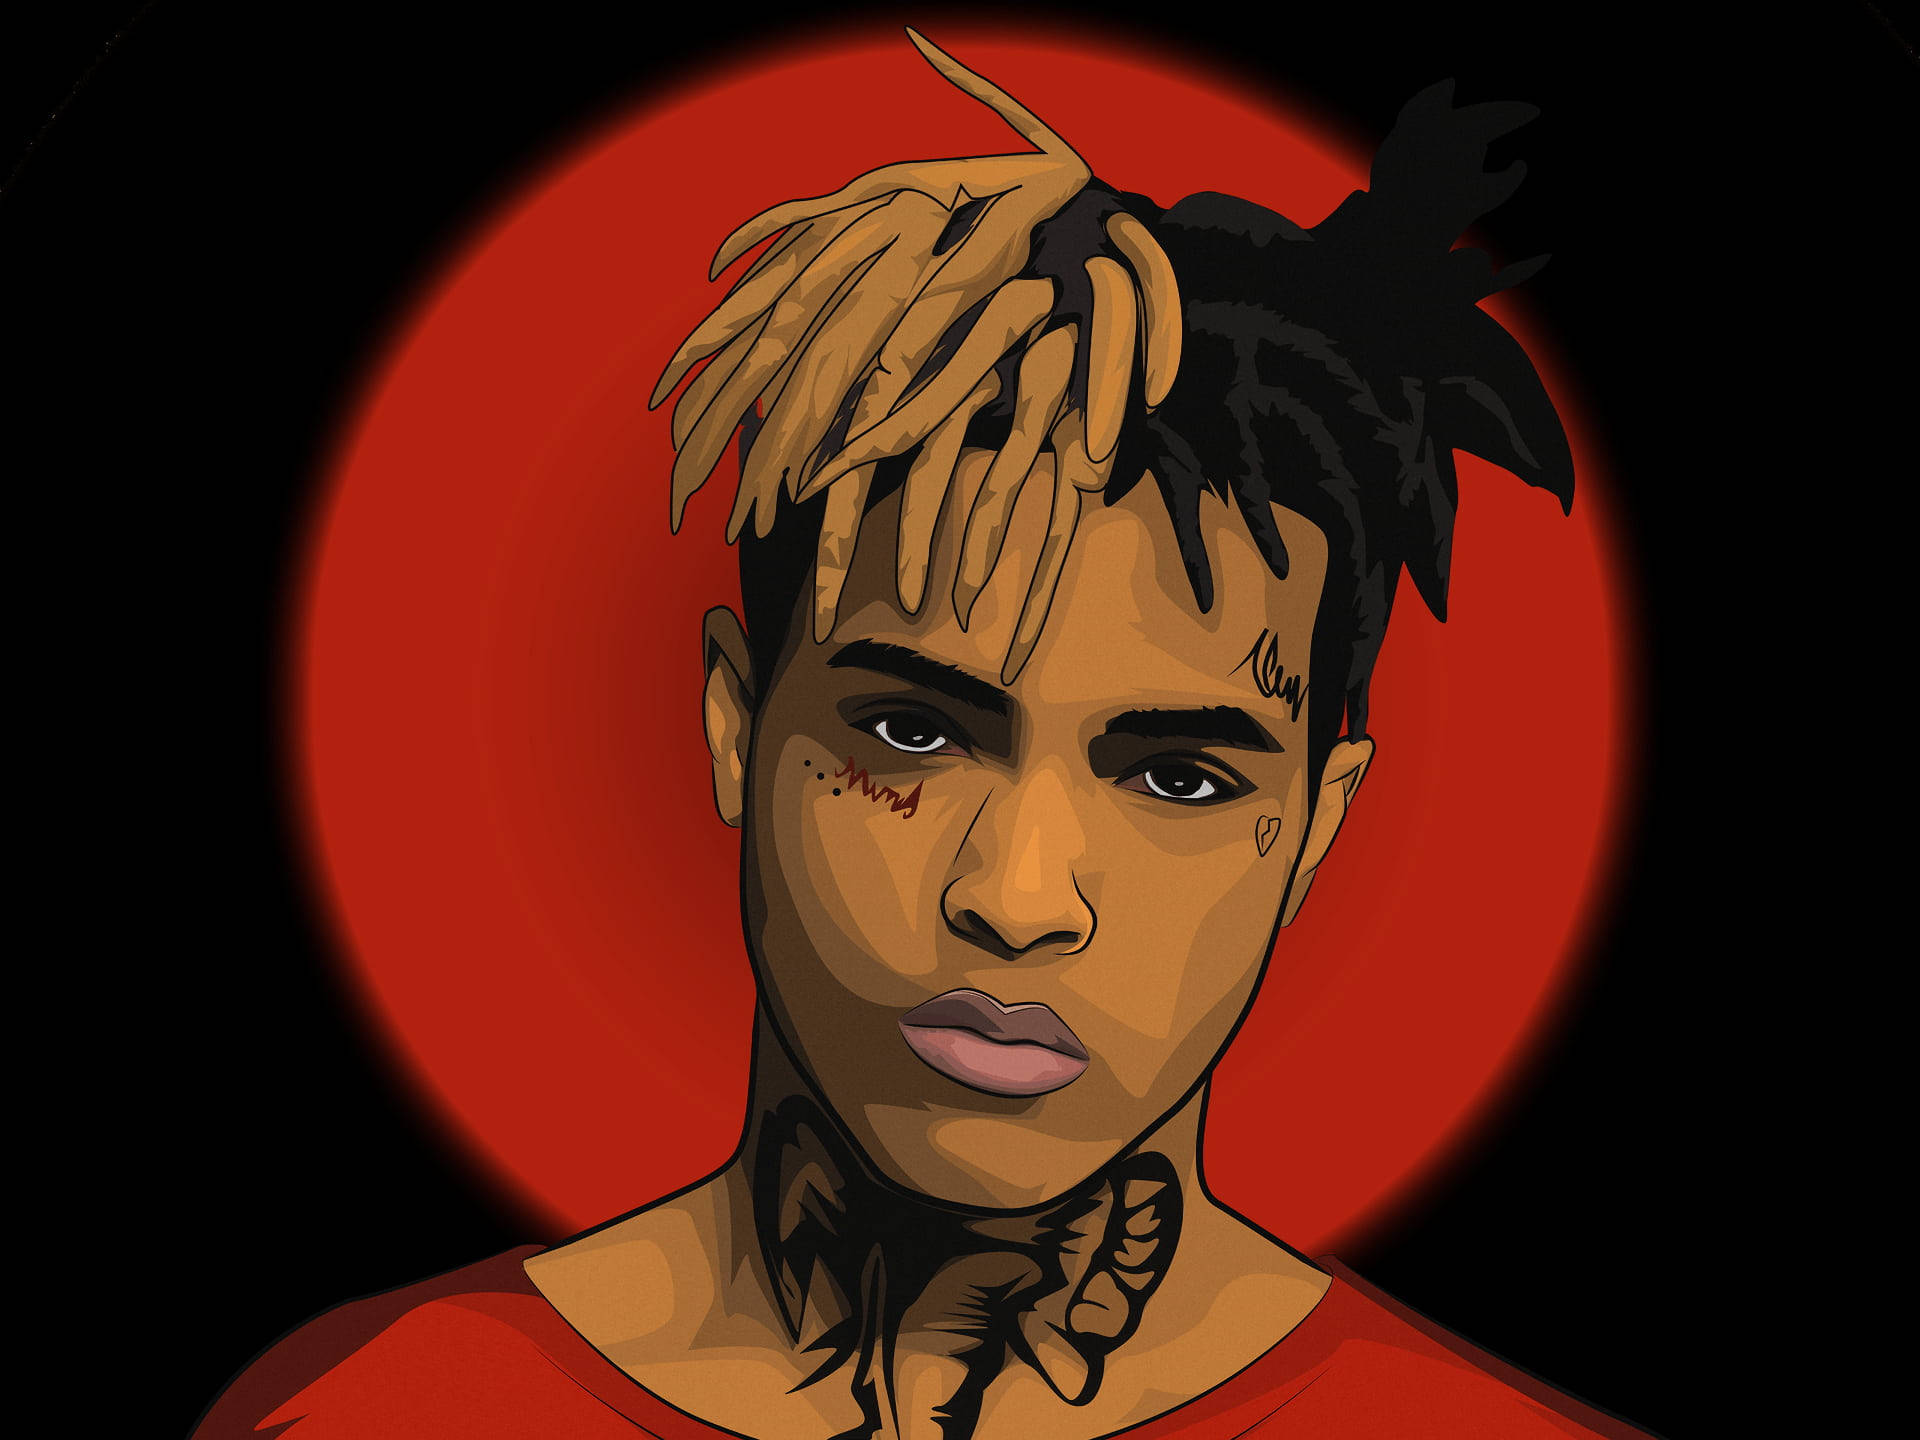 Xx Tentacion In Red And Black Background